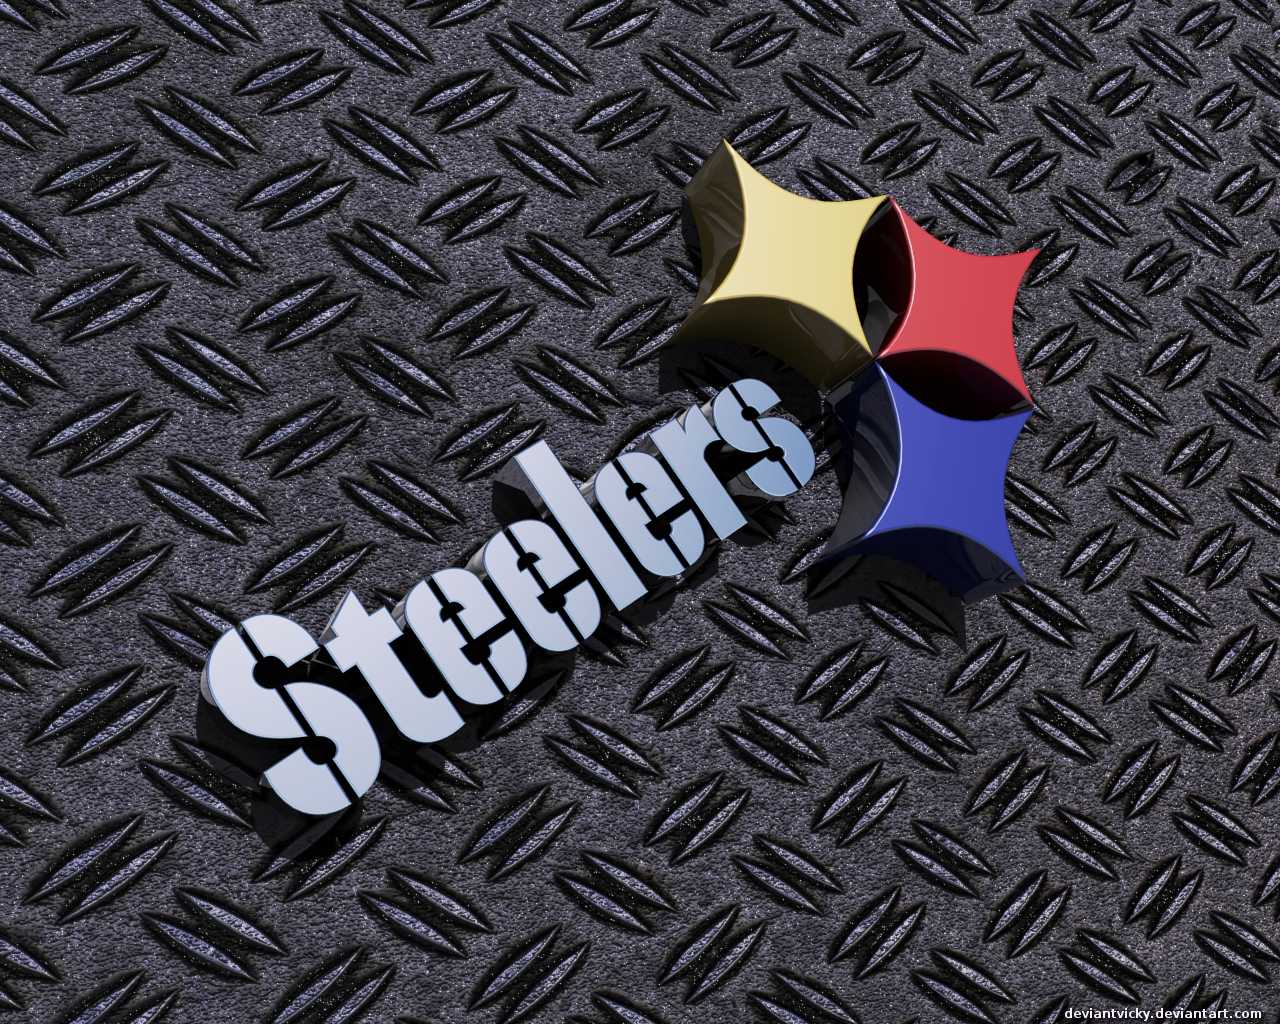 Steelers 3d By Deviantvicky X